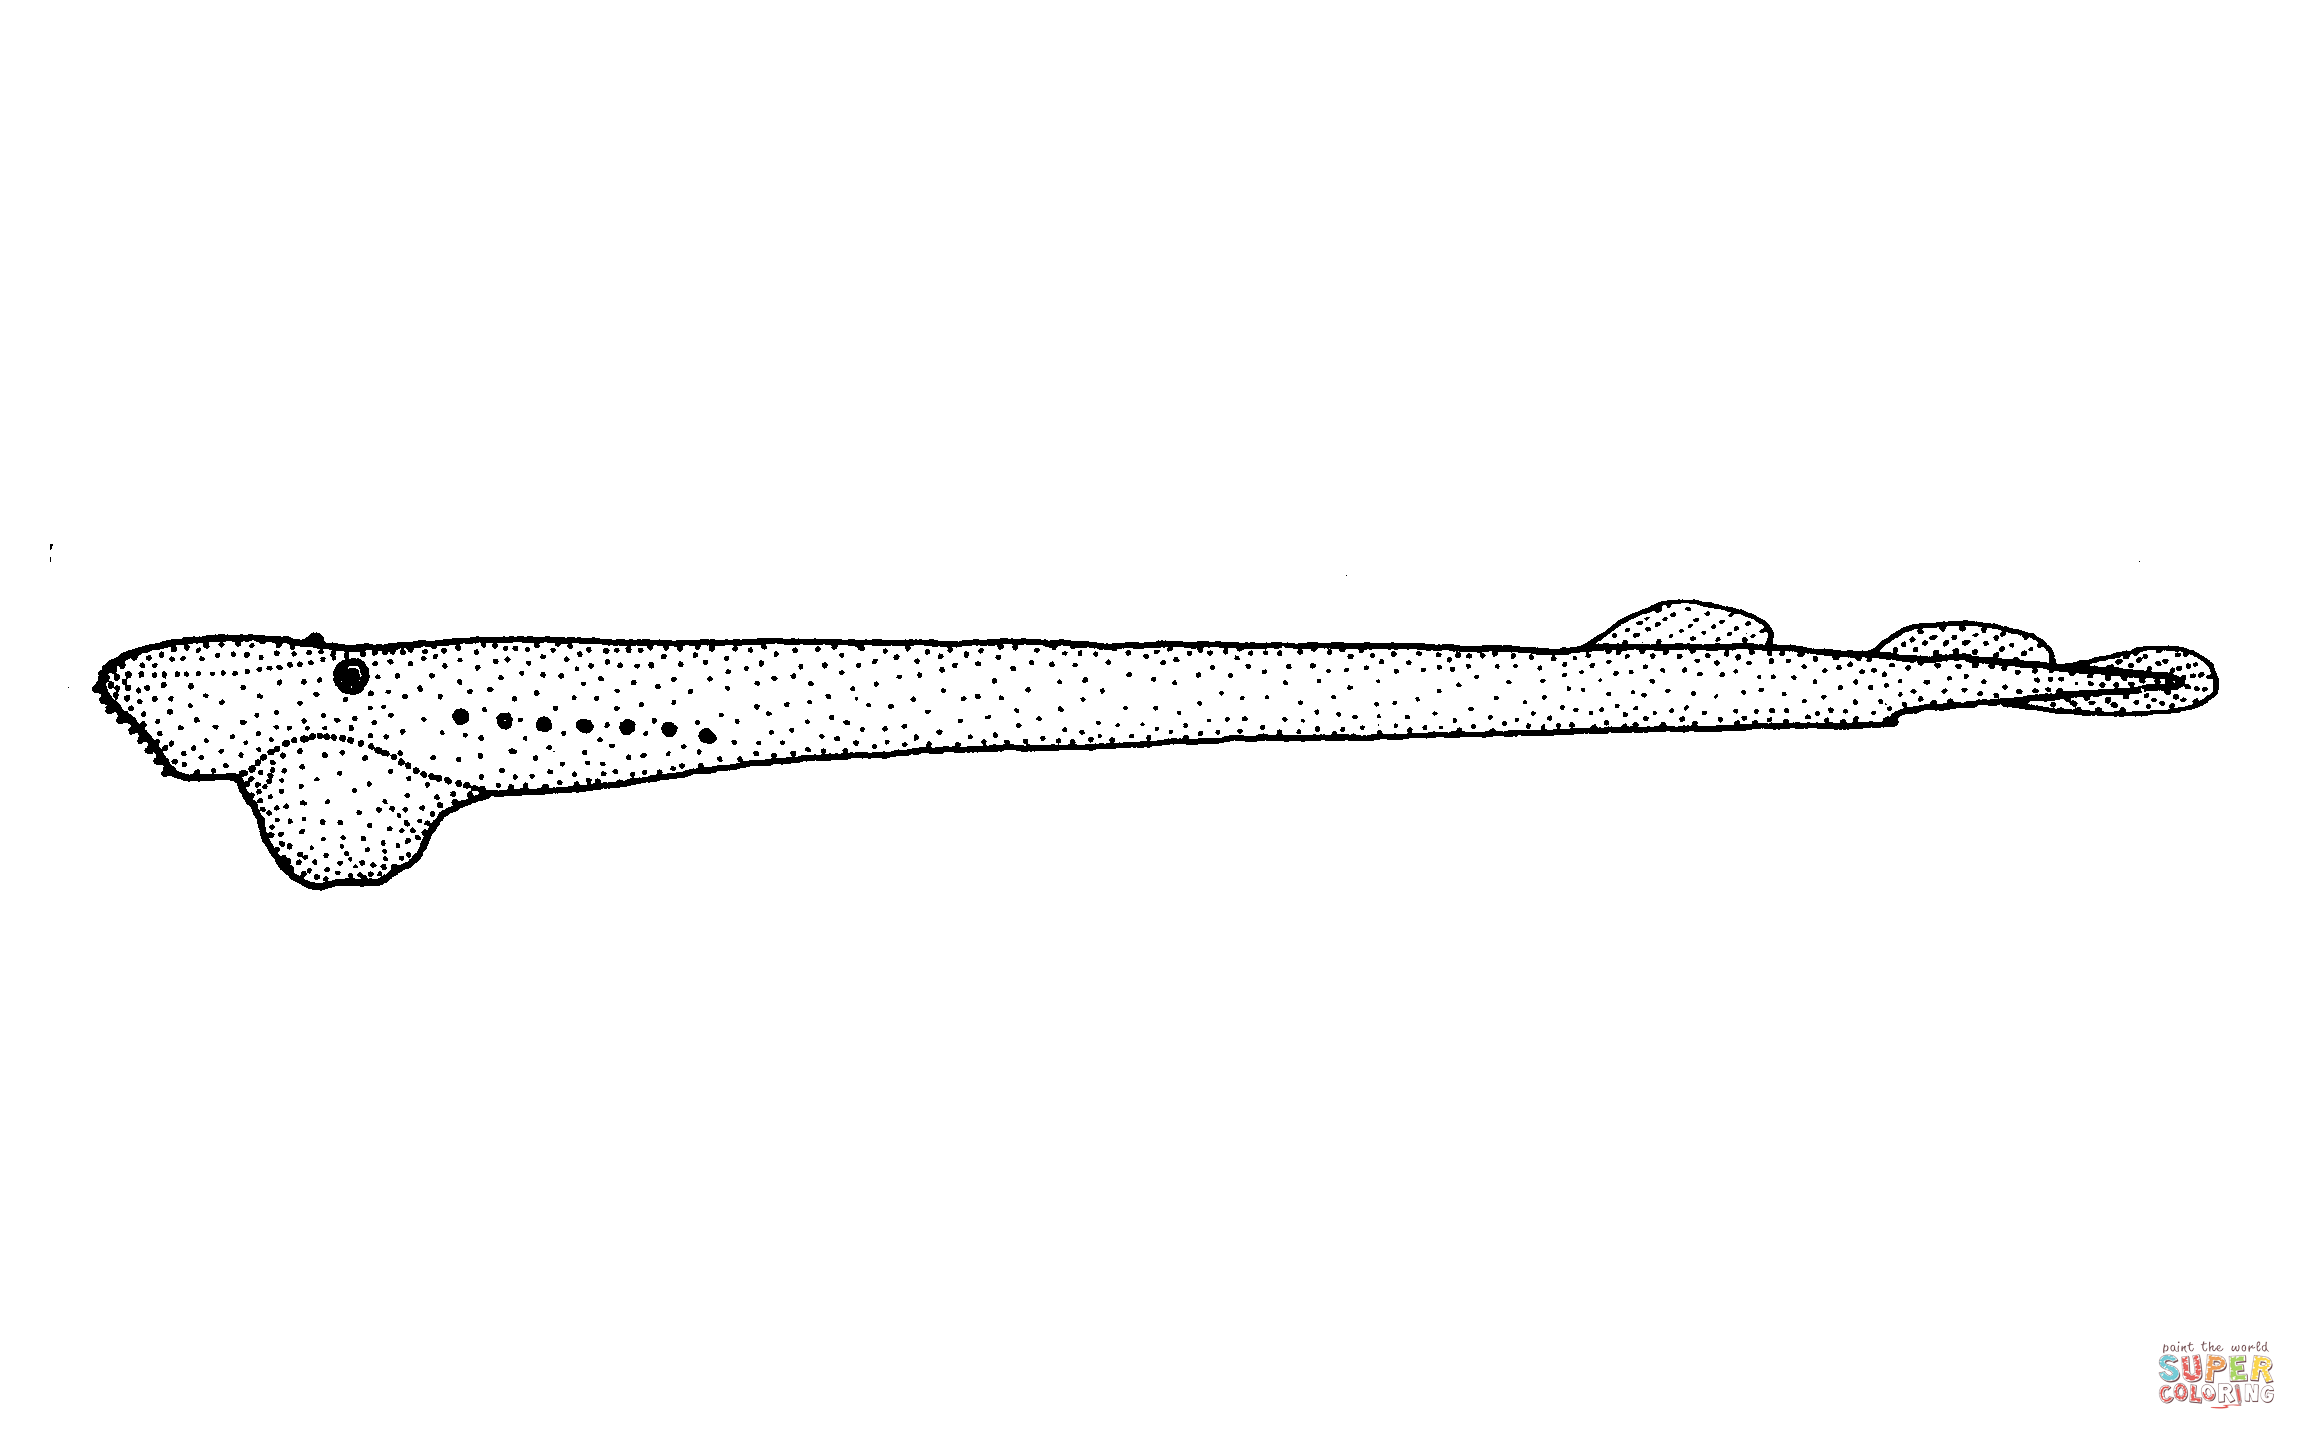 Geotria australis pouched lamprey coloring page free printable coloring pages